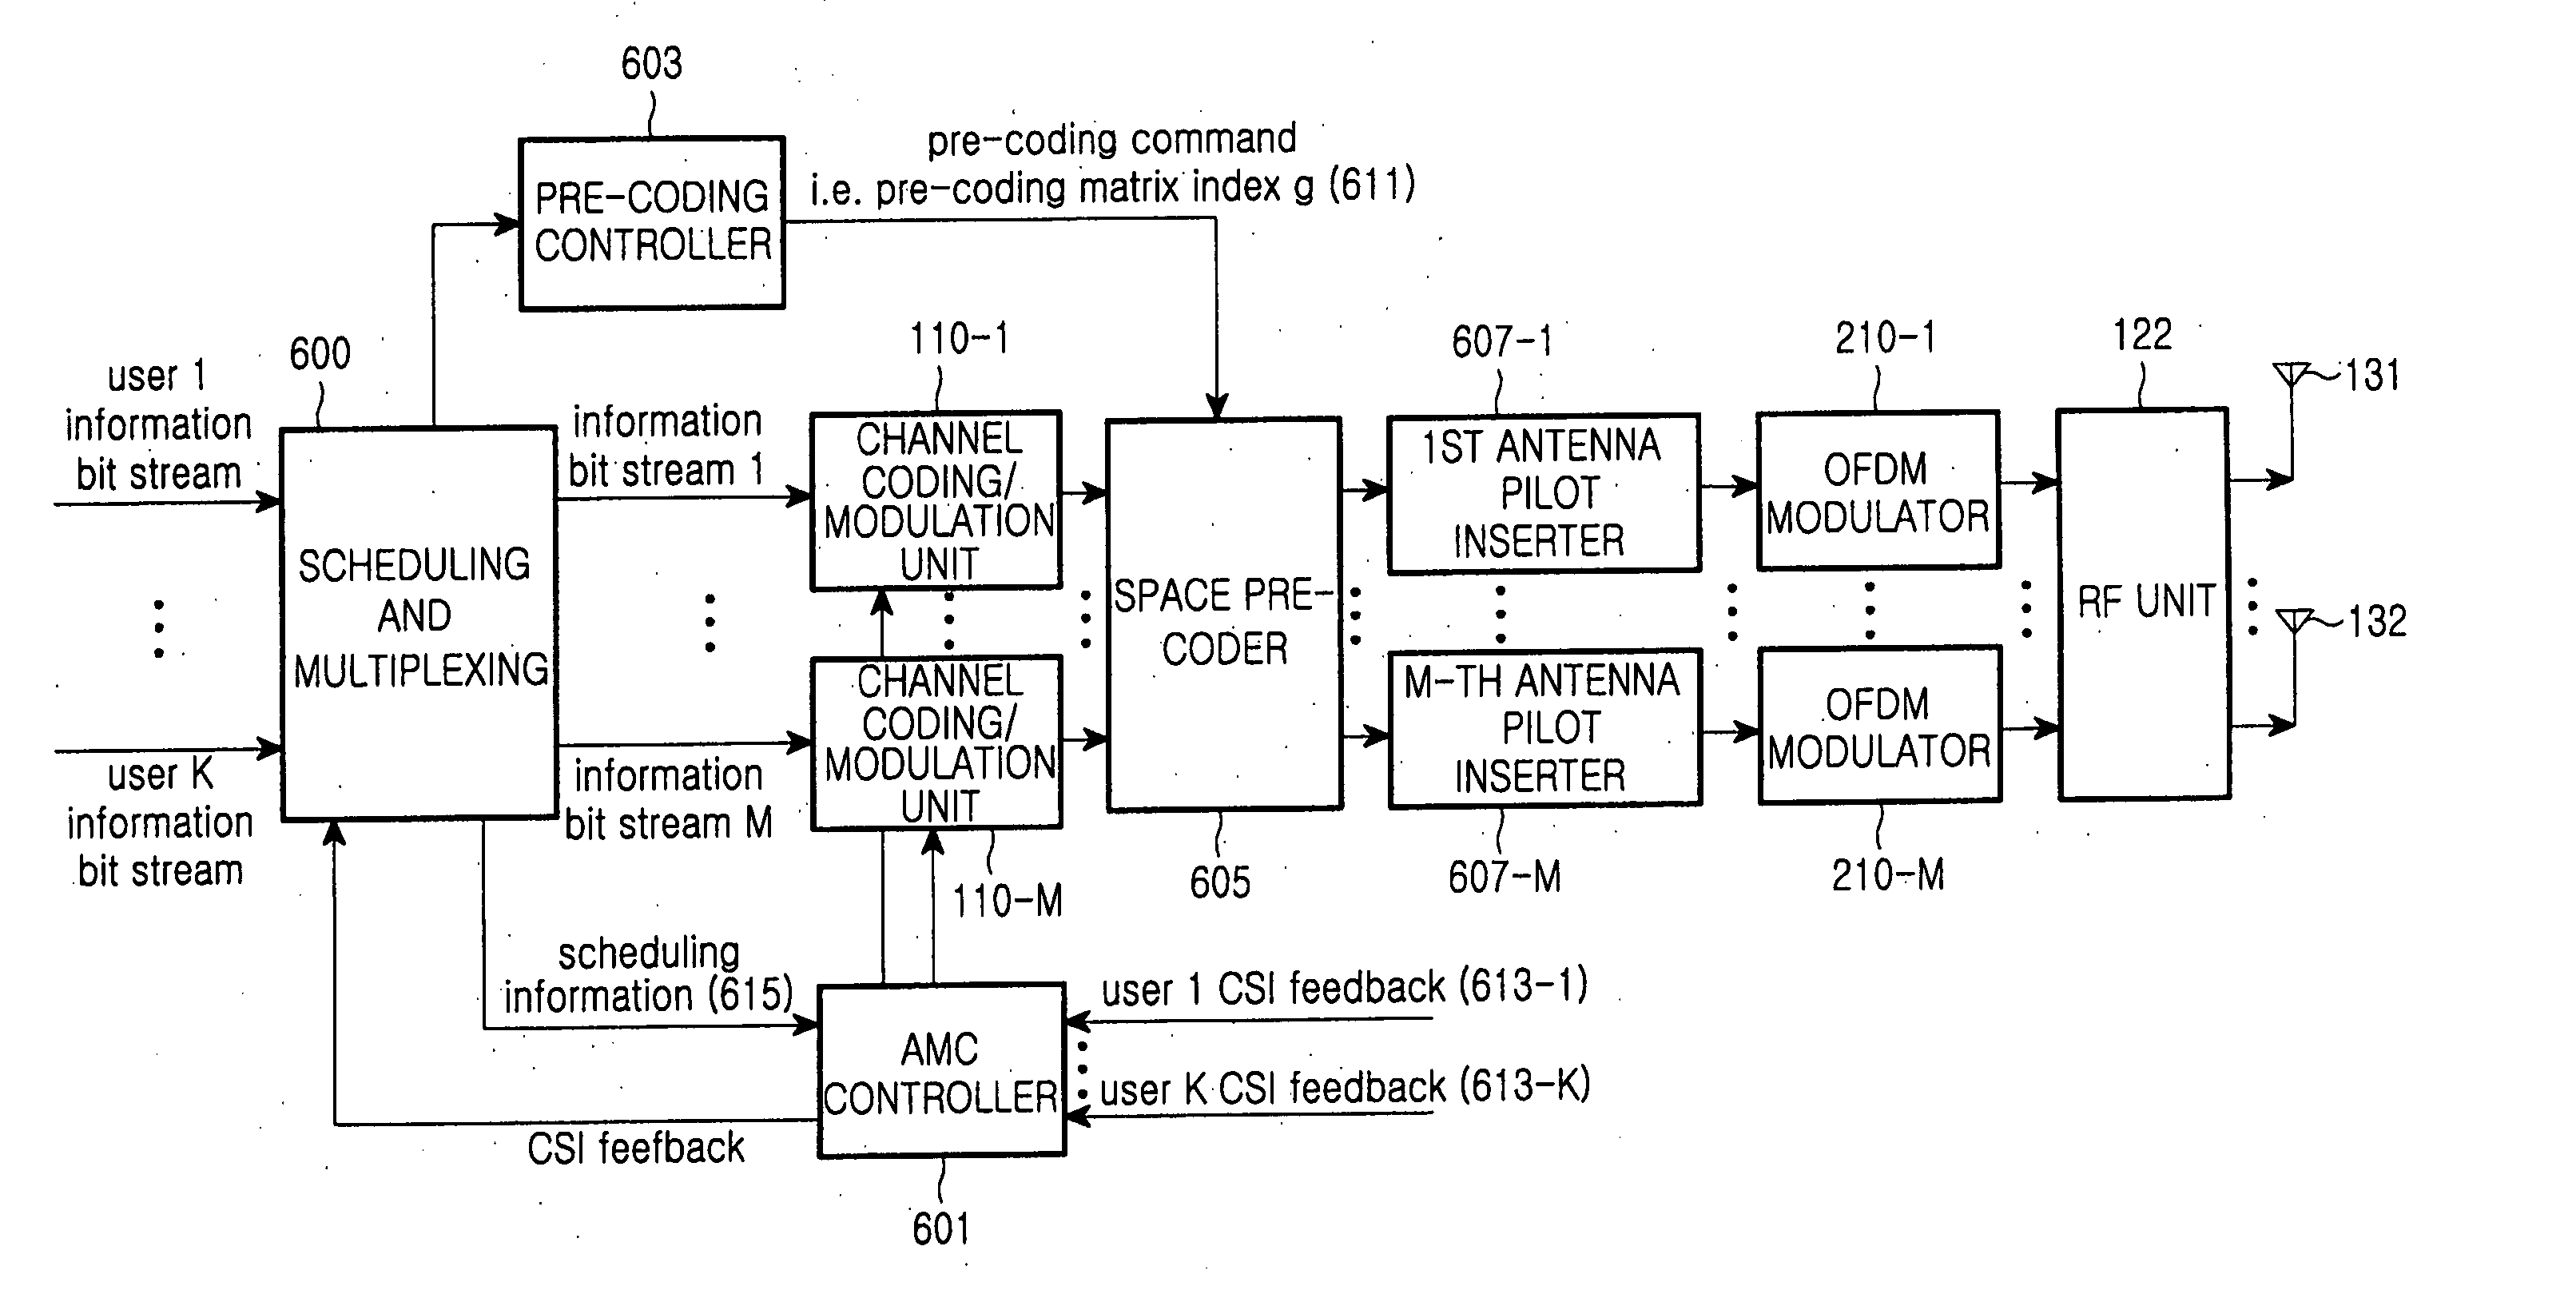 Apparatus and method for transmitting/receiving data in a multi-antenna communication system